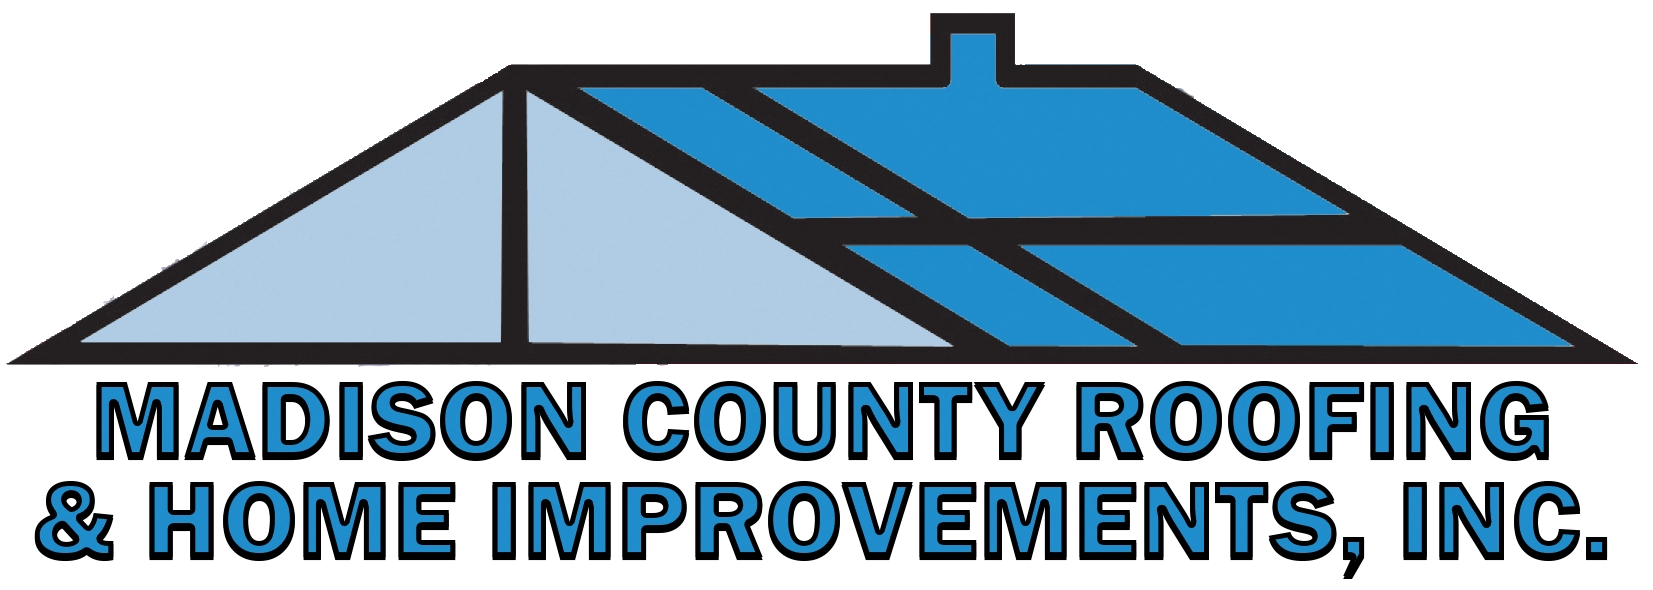 Madison County Roofing & Home Improvements Logo